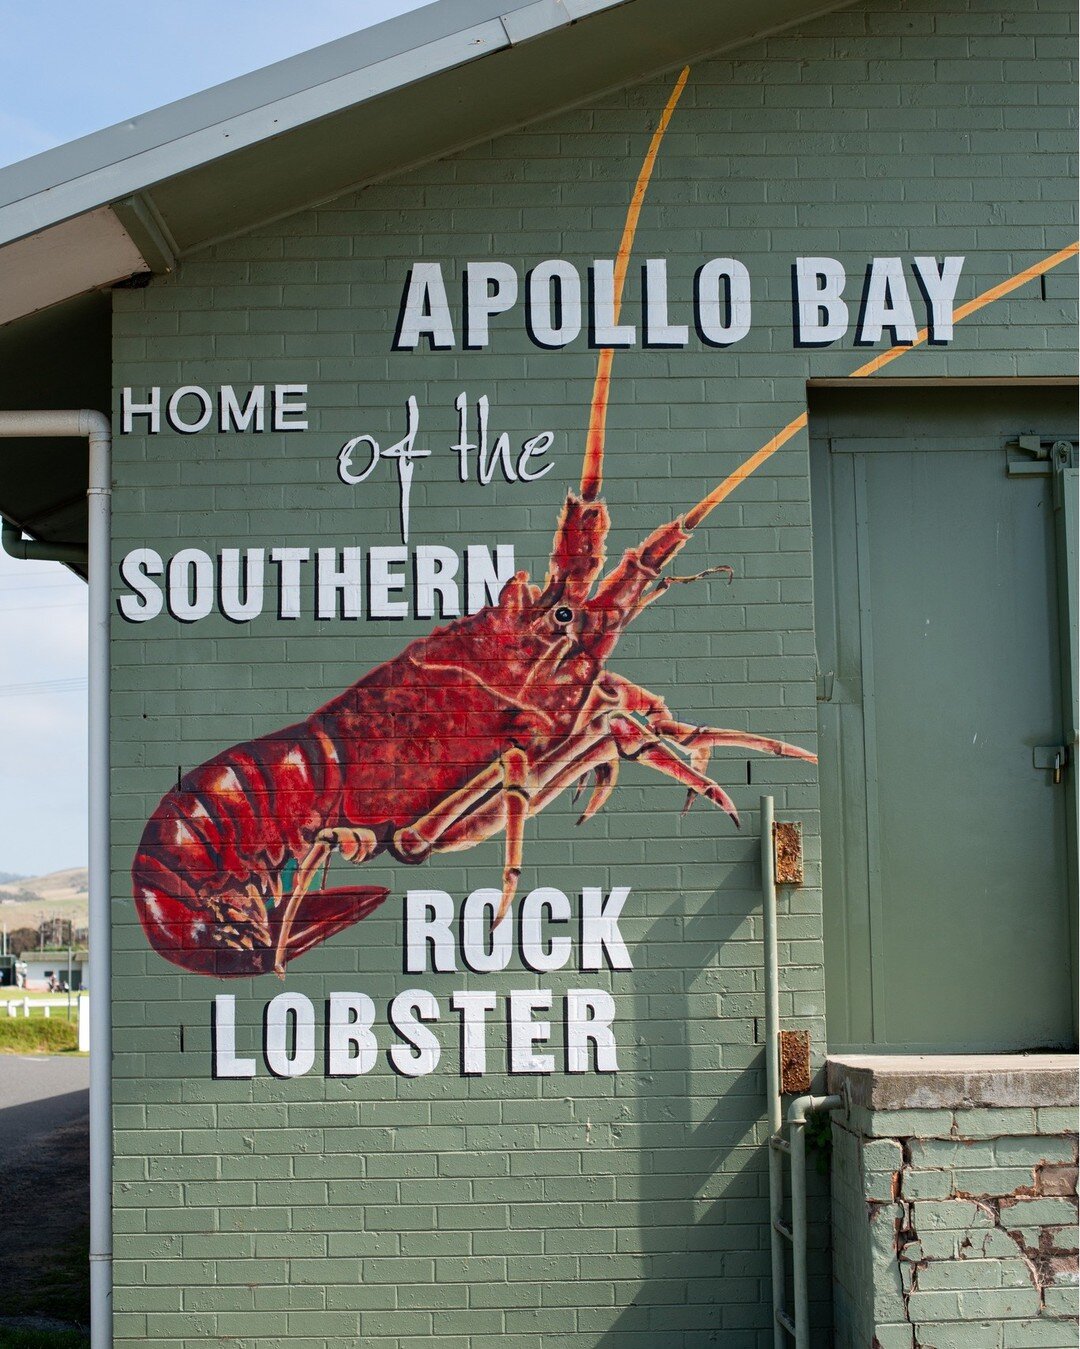 Home of the Southern Rock Lobster. 🦞 🤤

📸 apollo bay holiday park